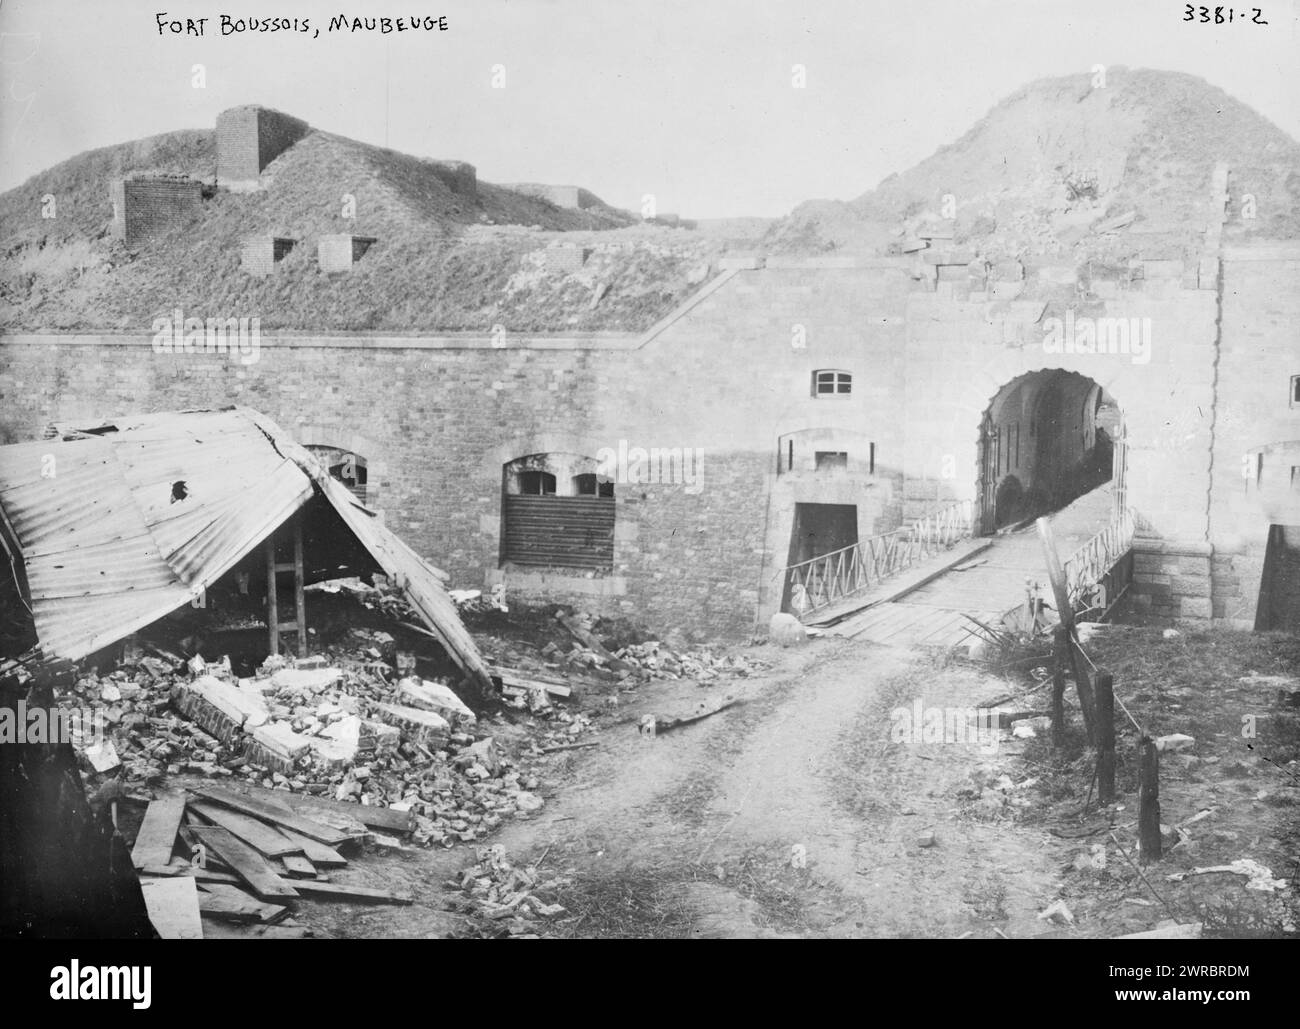 Fort Boussois, Maubeuge, Photograph shows Fort Boussois, Maubeuge, France, possibly after its capture by German forces in September 1914, during World War I., between 191 and ca. 1915, World War, 1914-1918, Glass negatives, 1 negative: glass Stock Photo